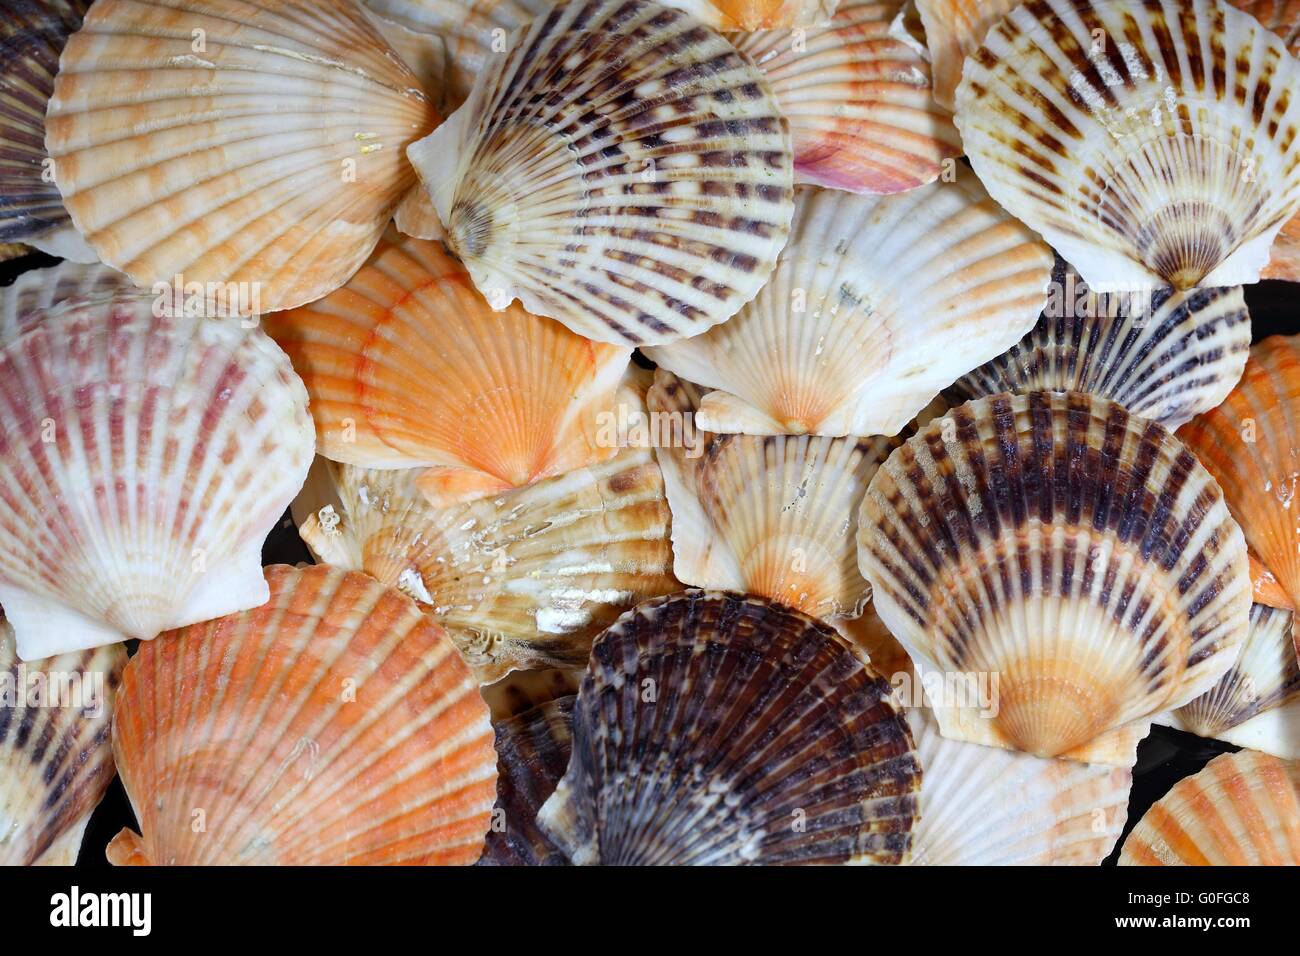 Shells of the Scallop  species  Zyclochlamys patagonica. Stock Photo